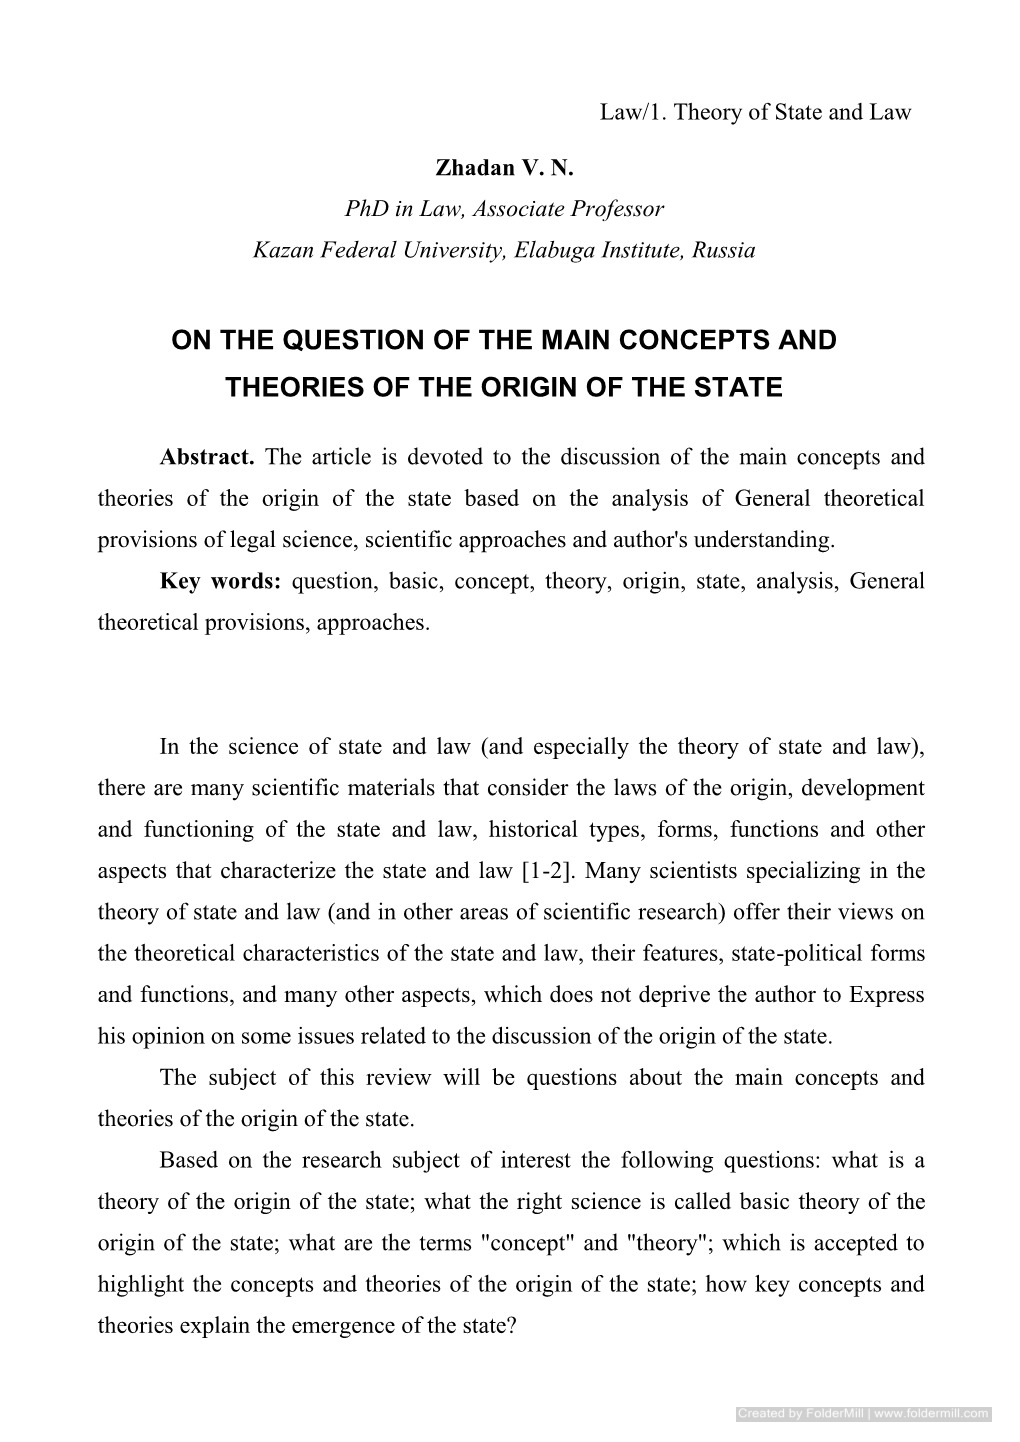 On the Question of the Main Concepts and Theories of the Origin of the State